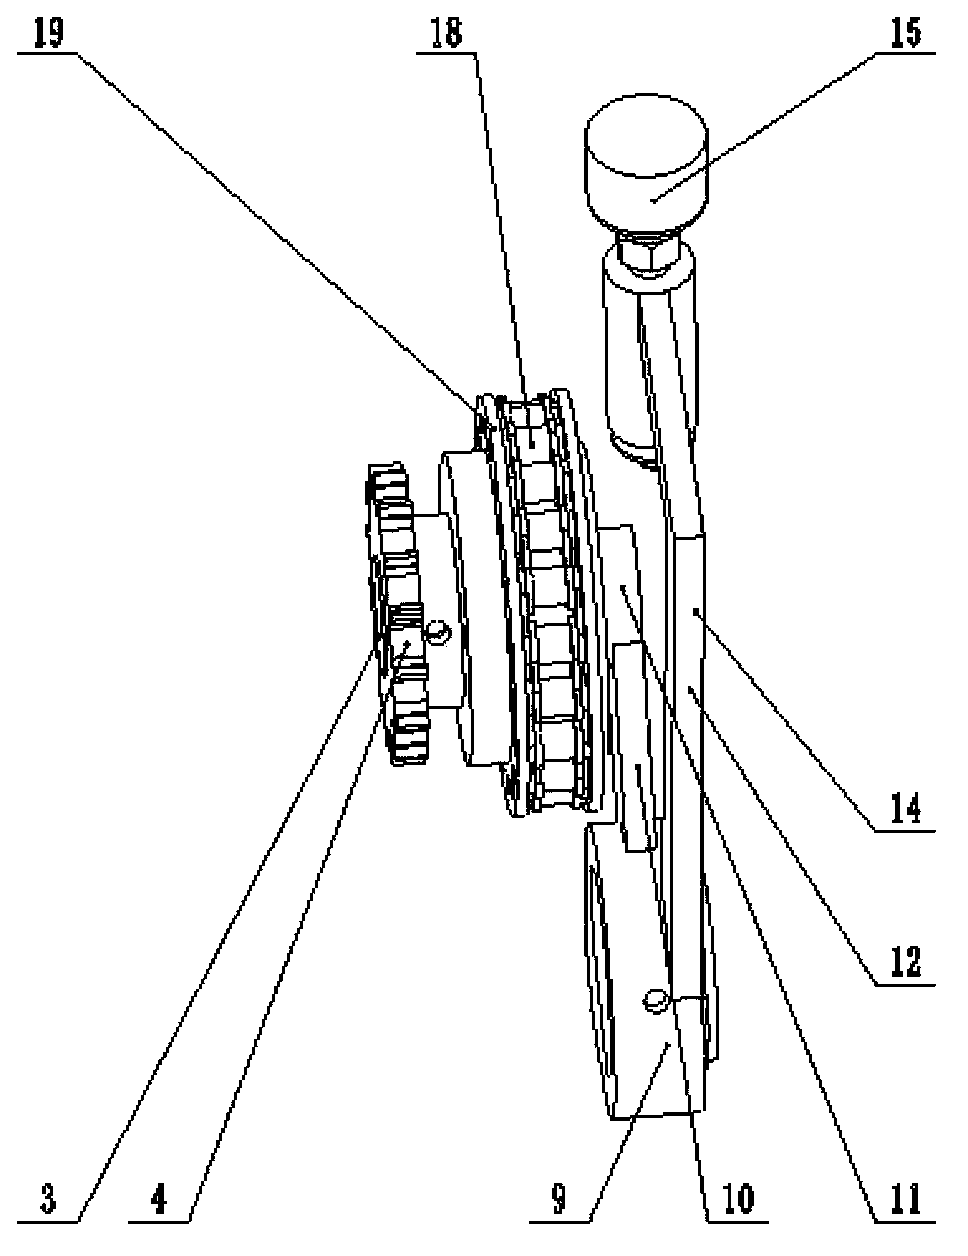 Adjusting device for variables of seed-sowing machine combining seeding and fertilizing